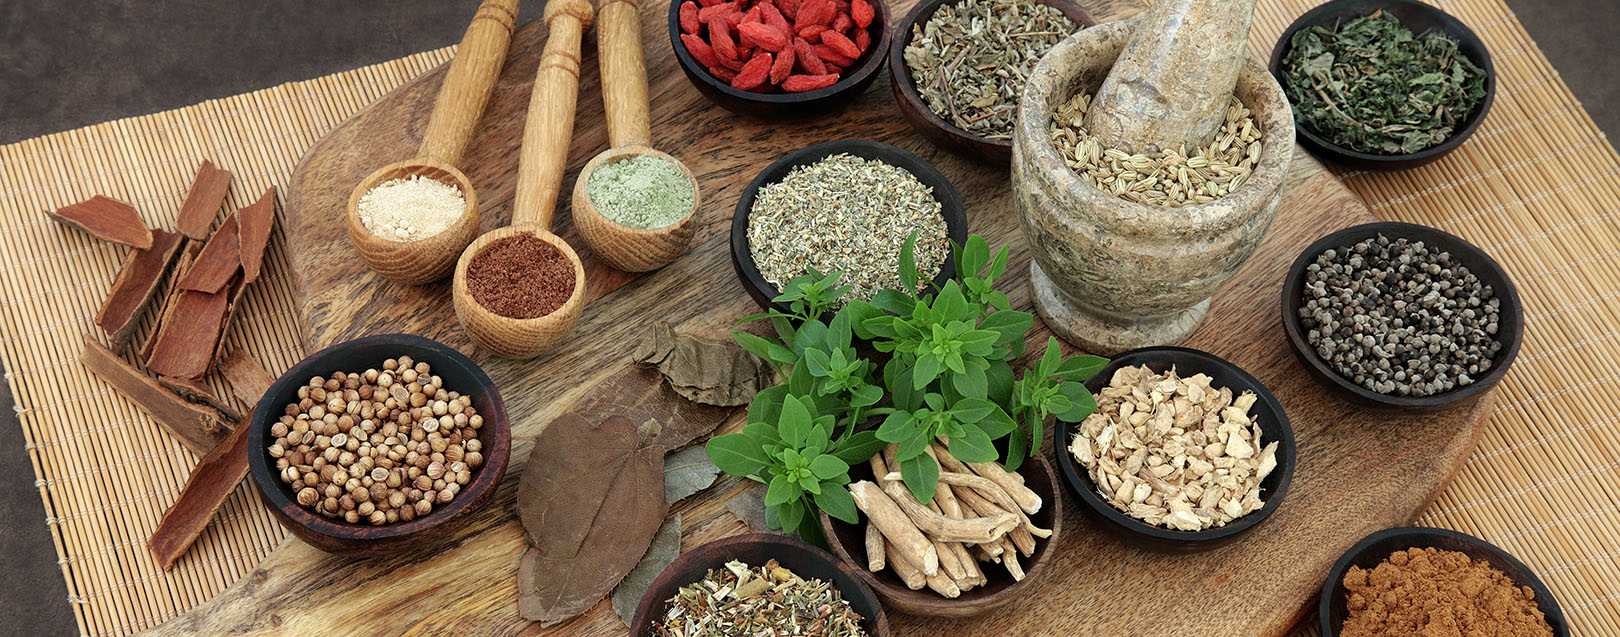 AYUSH Minister seeks inputs from global experts to turn India into Ayurveda hub